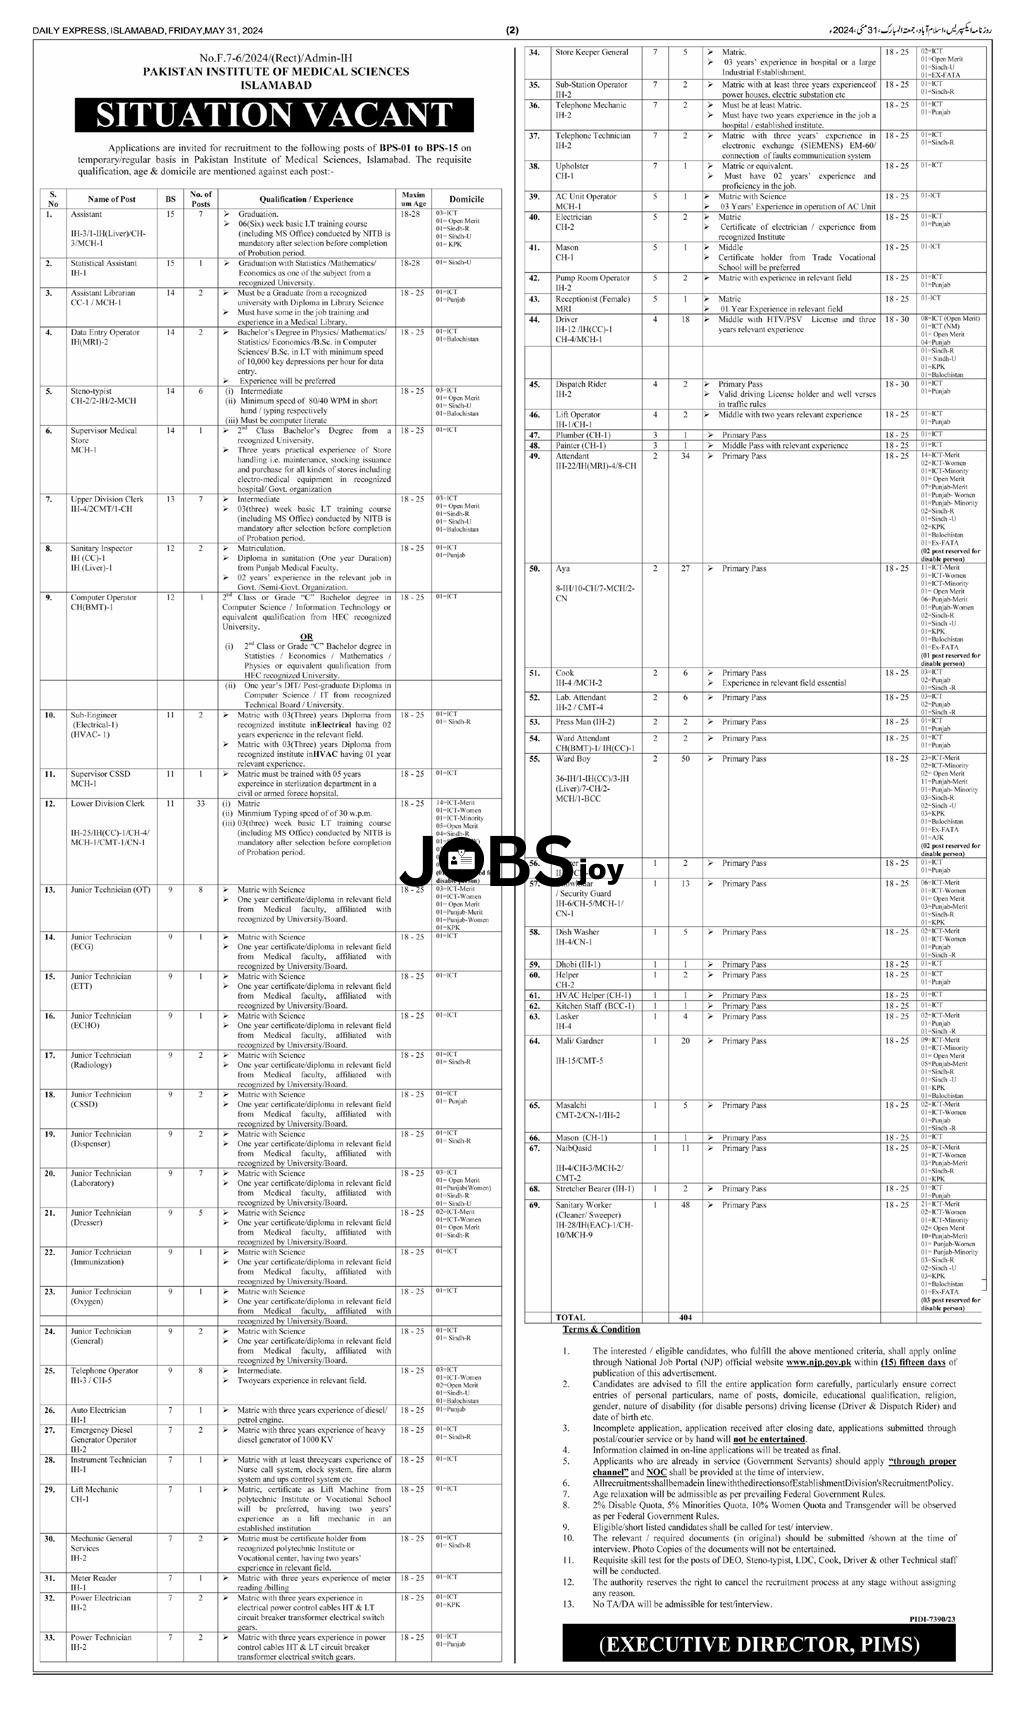 Assistant Opportunities Pakistan Institute of Medical Sciences Islamabad 2024